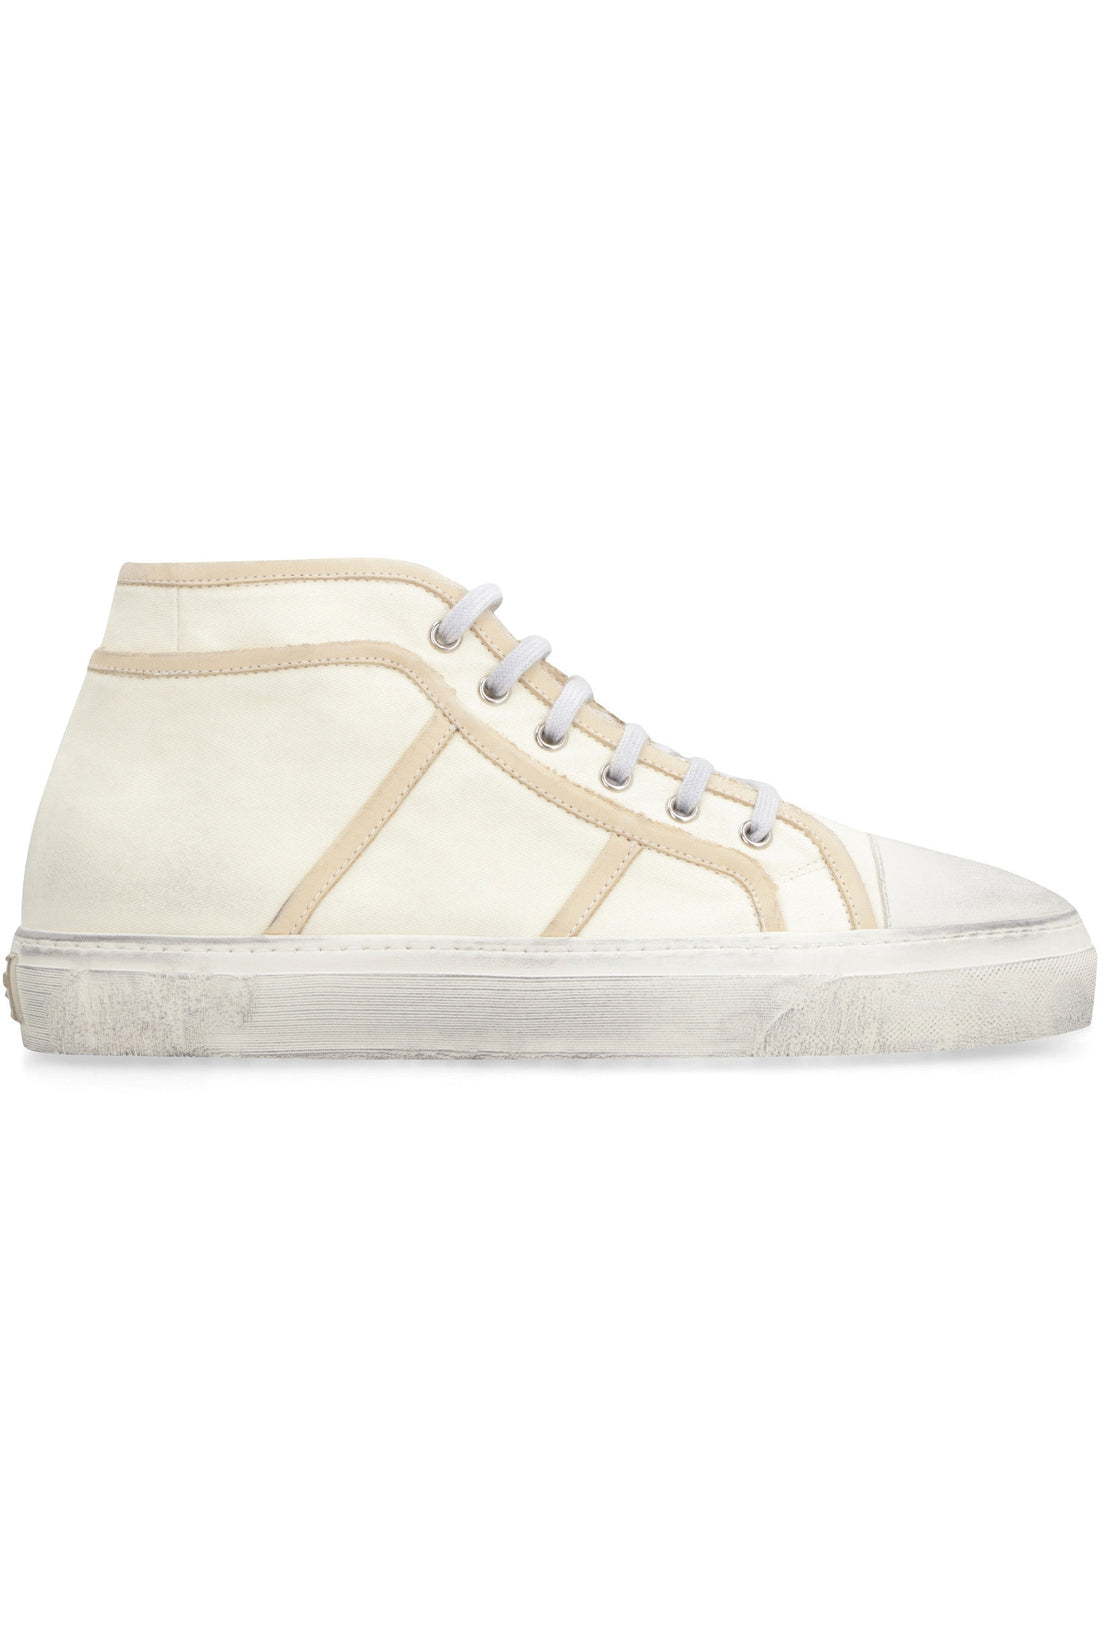 Dolce & Gabbana-OUTLET-SALE-Canvas mid-top sneakers-ARCHIVIST